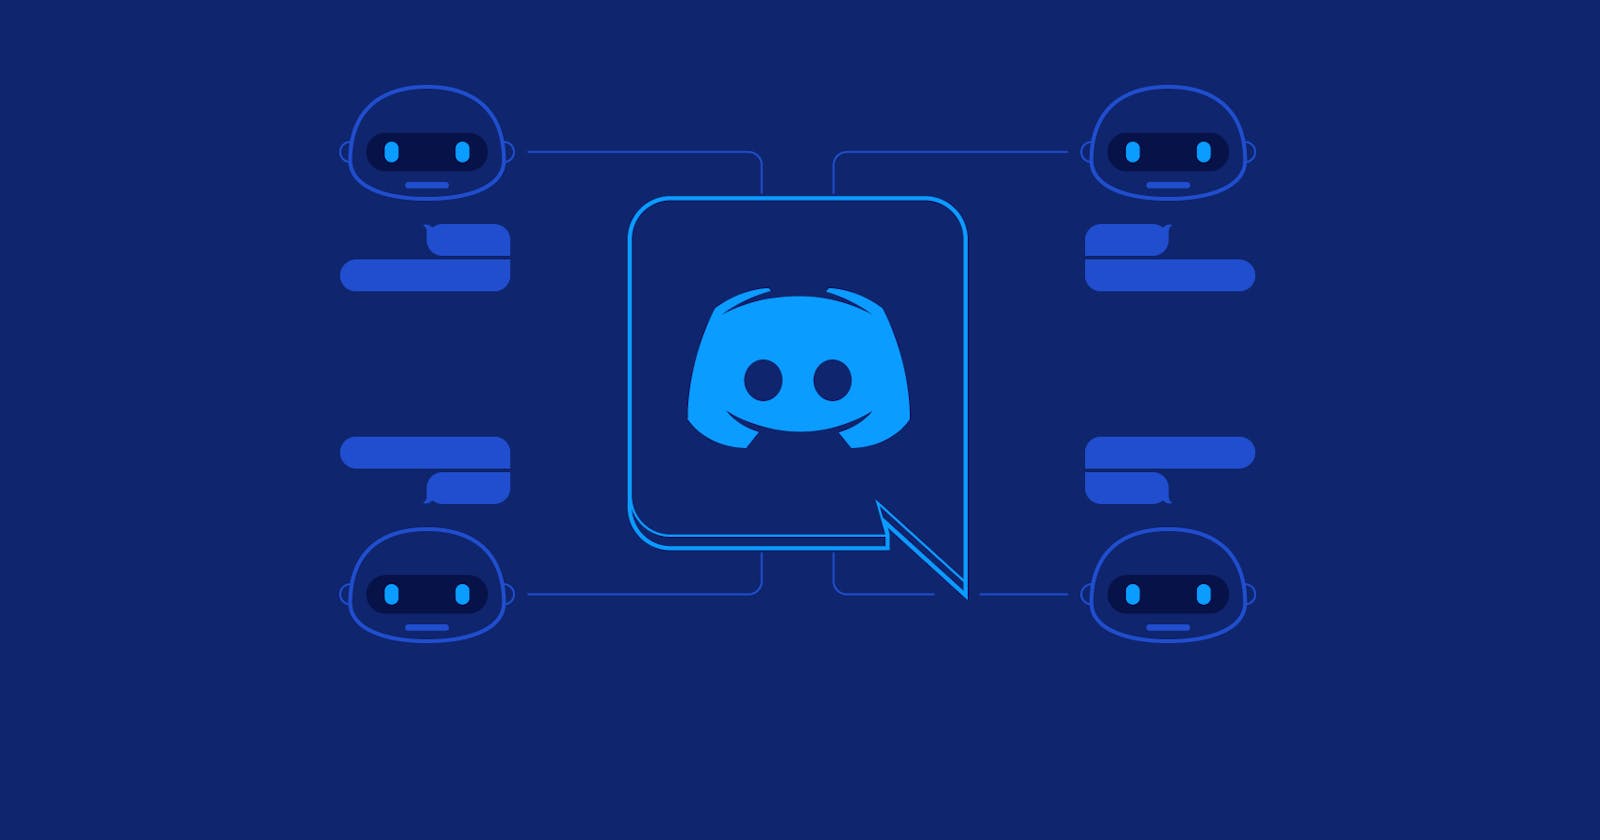 Discord Bots - A new trend of 2022?